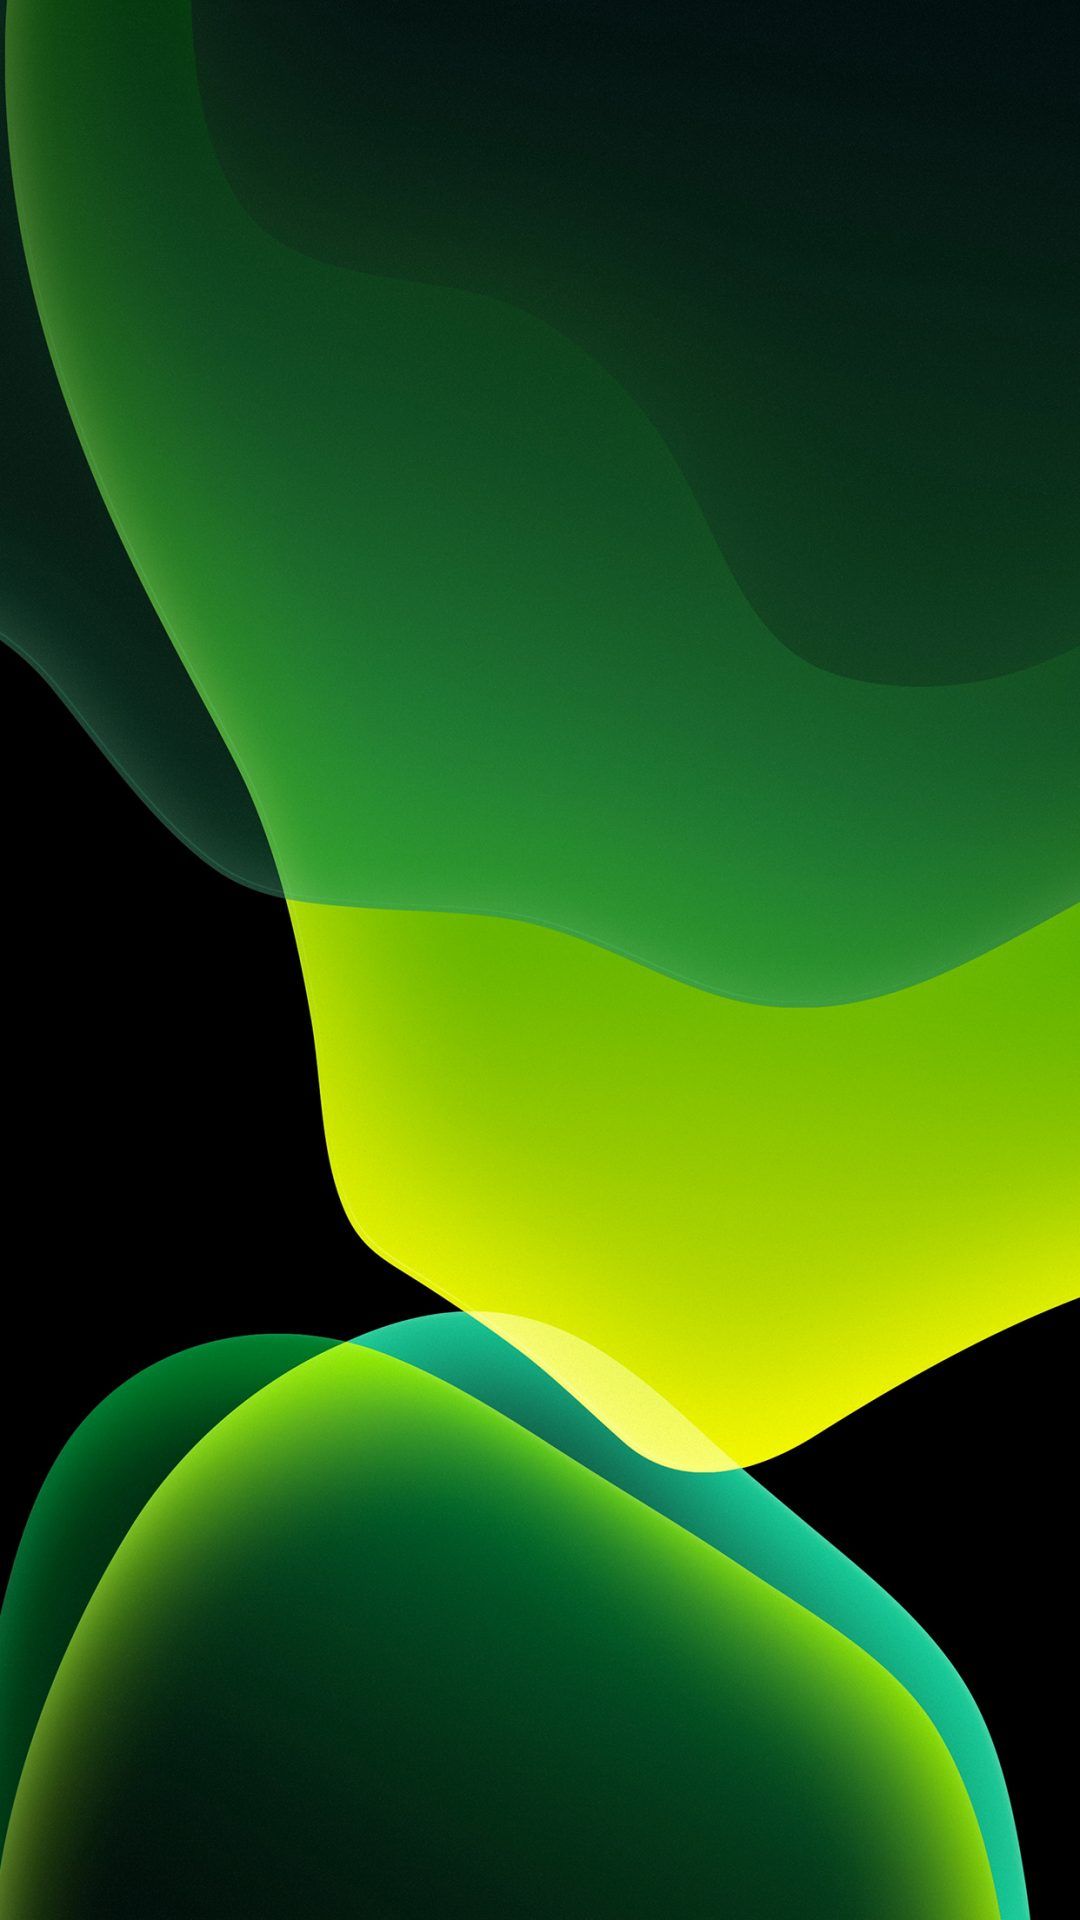 HD 4k Mobile Black And Green Wallpapers - Wallpaper Cave